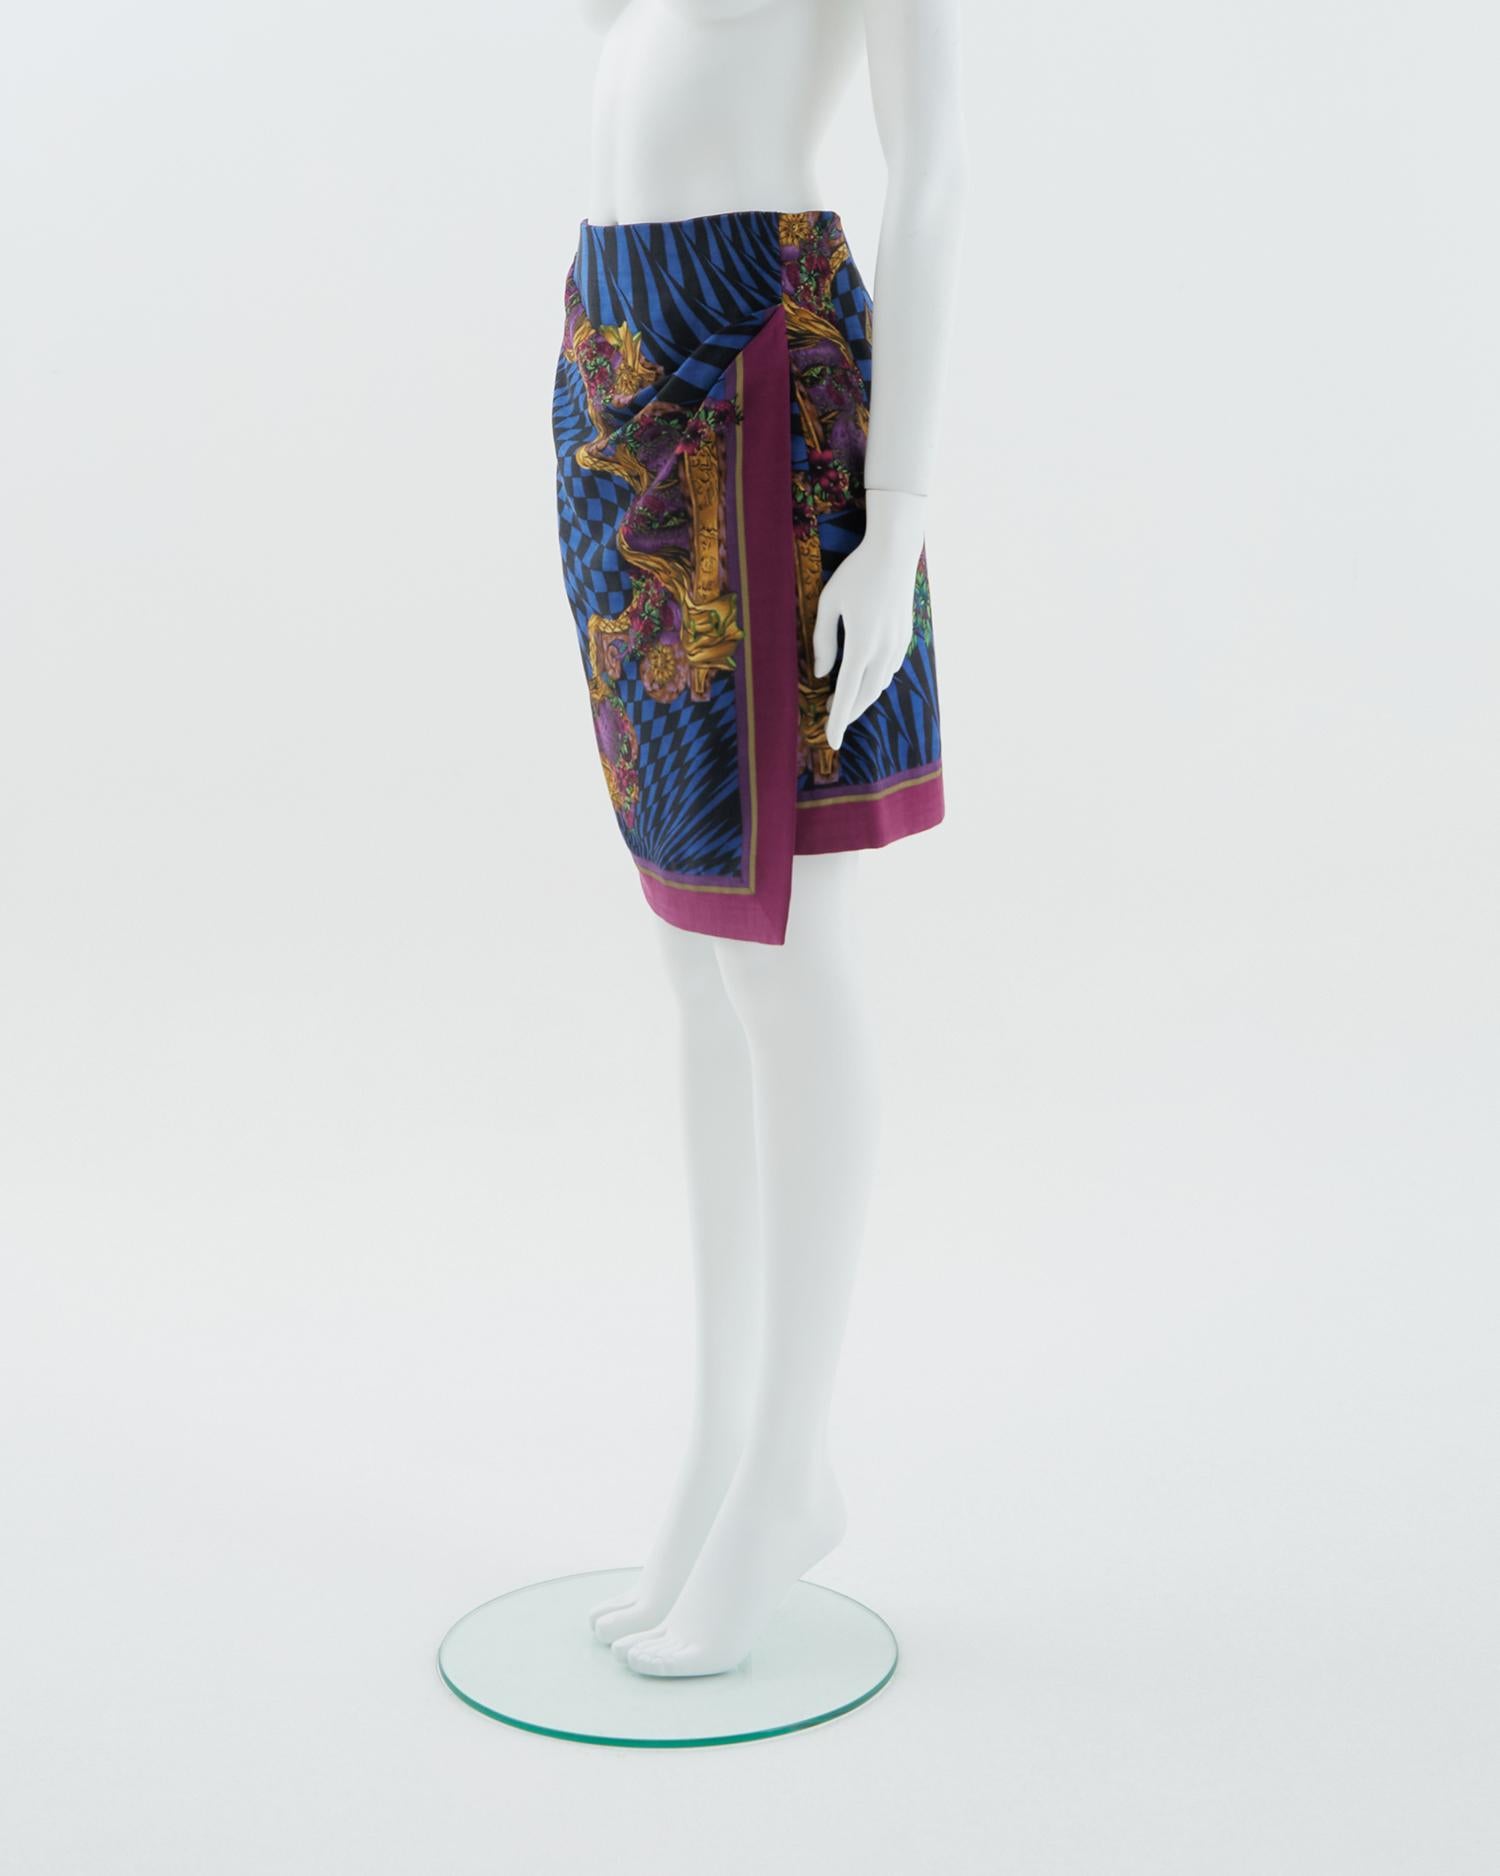 Gianni Versace Couture F/W 1991 Op art Atelier Print jacket and pencil skirt set 2